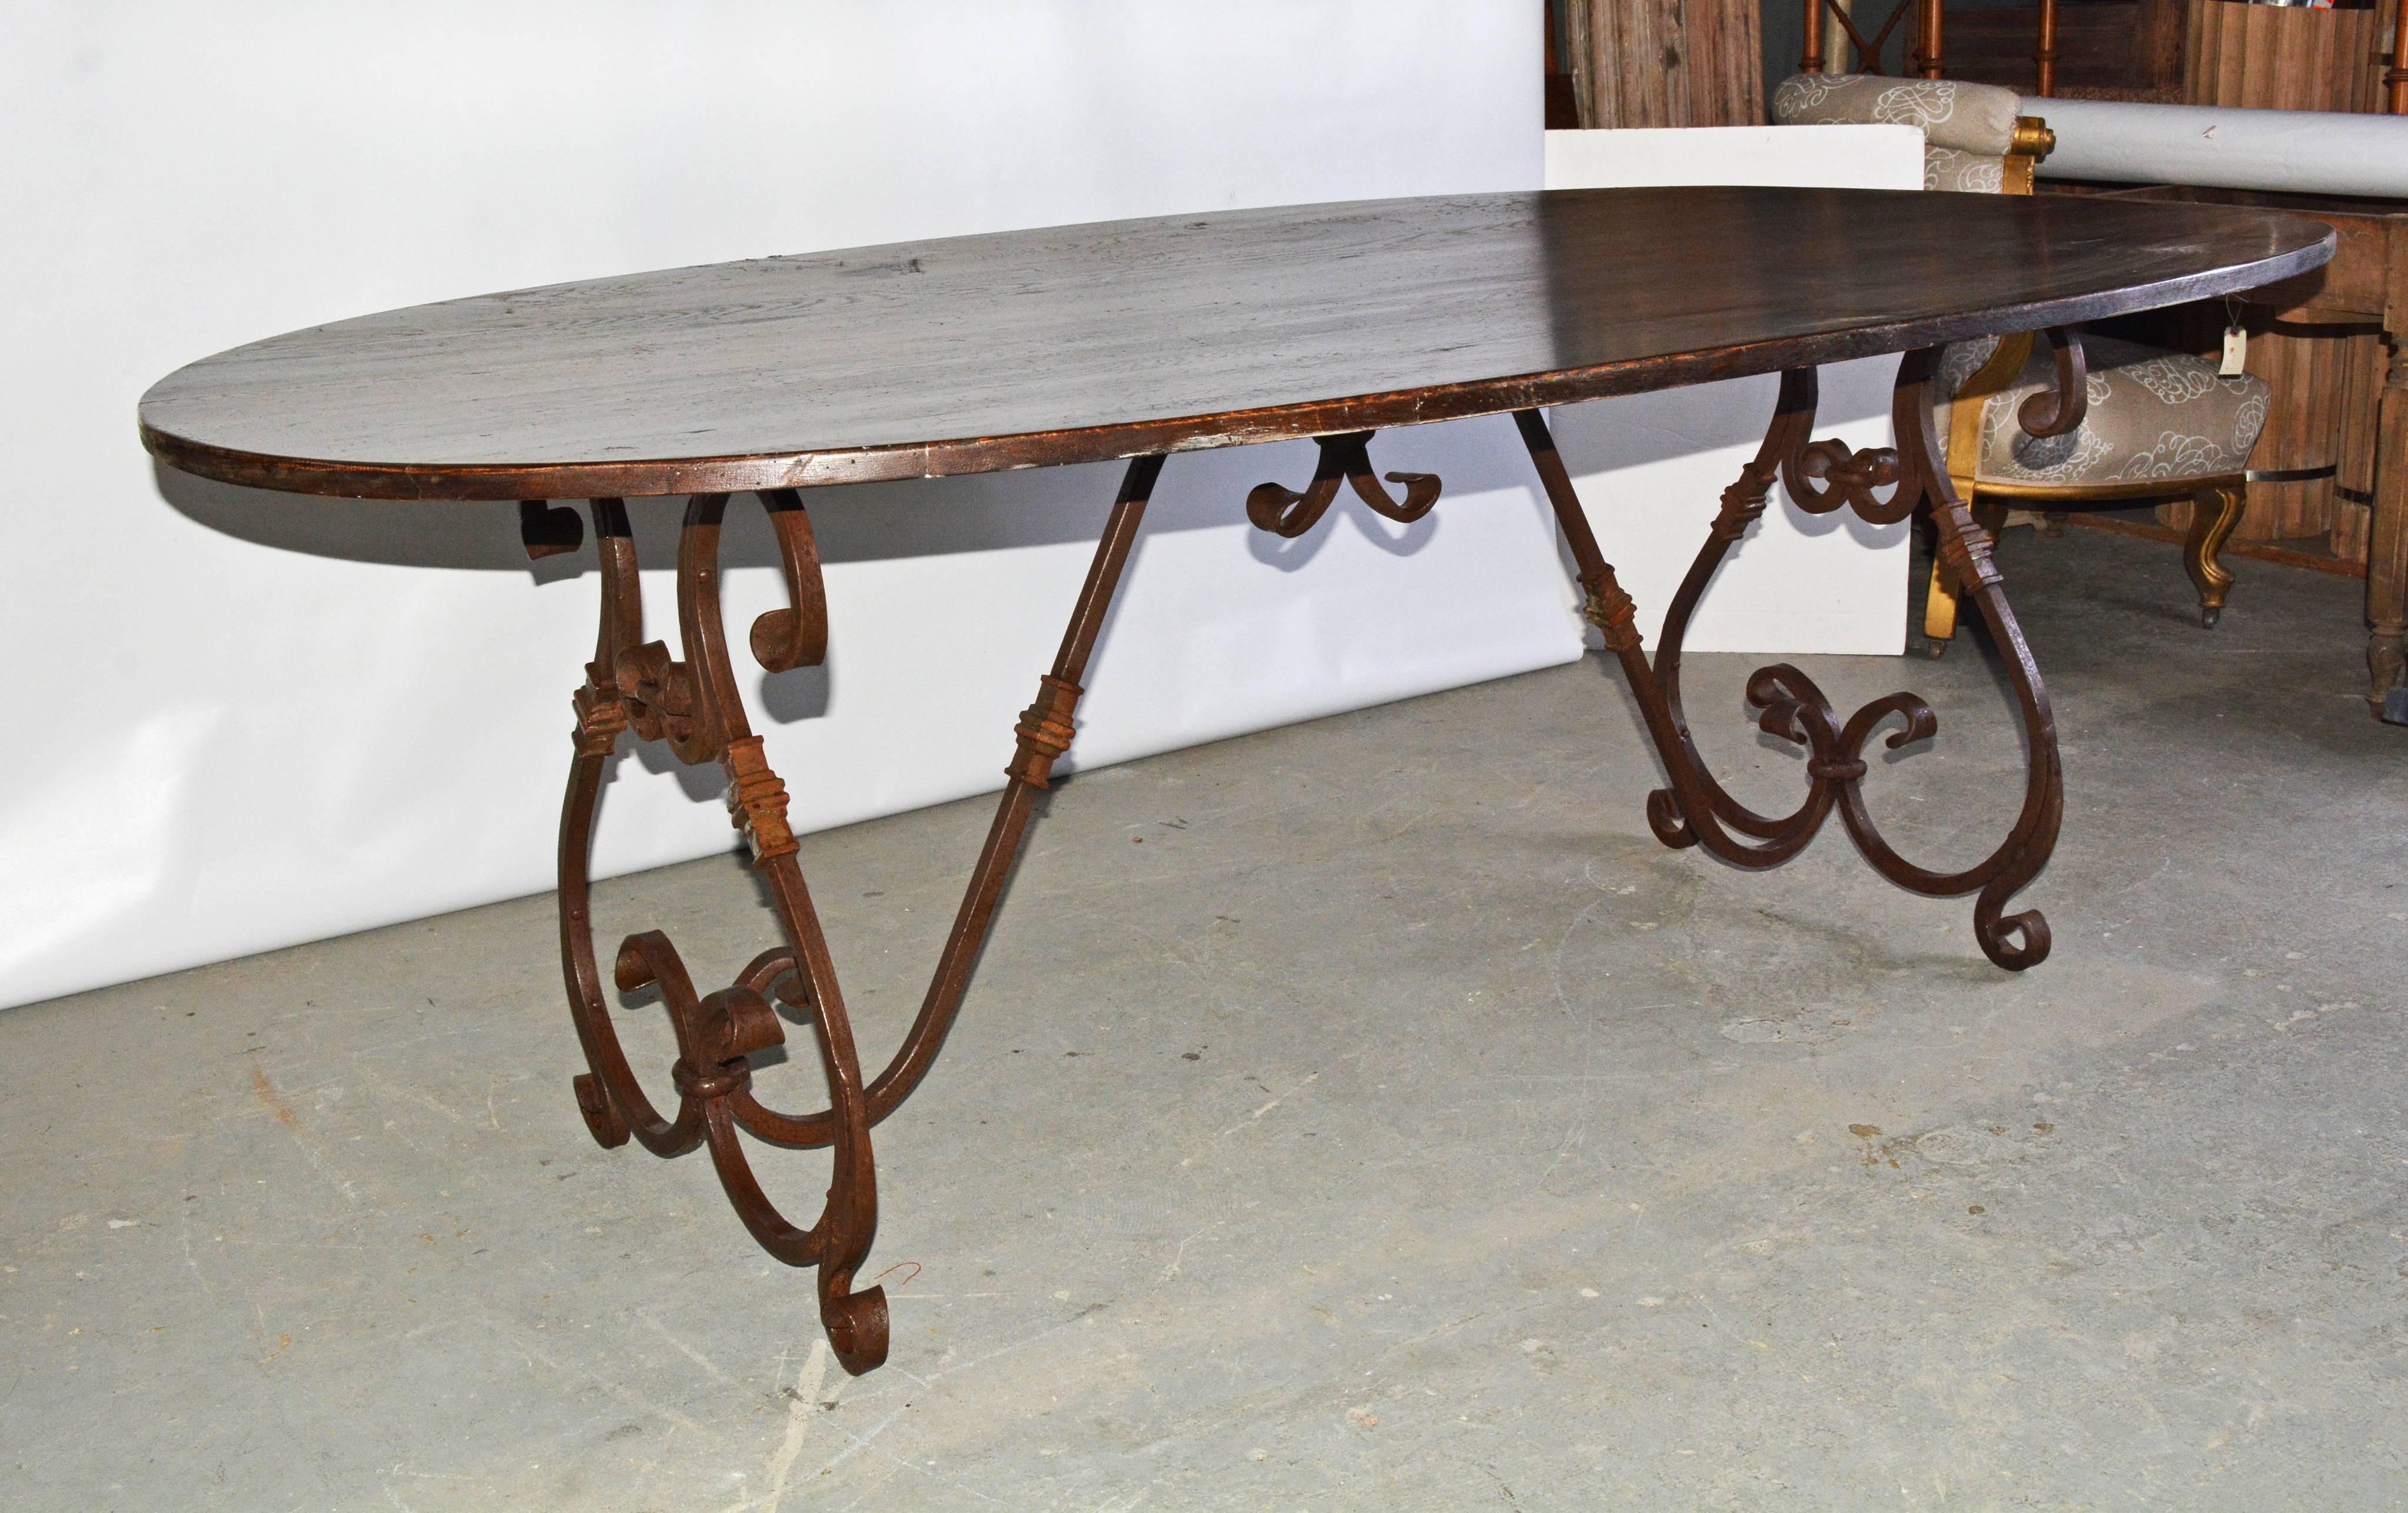 Elegant and rustic at the same time, the French Baroque style hand-forged iron trestle base features two lyre-shaped legs adorned with a weathered rust finish, connected to the underside of the top with a curved stretcher. The delicate volutes,